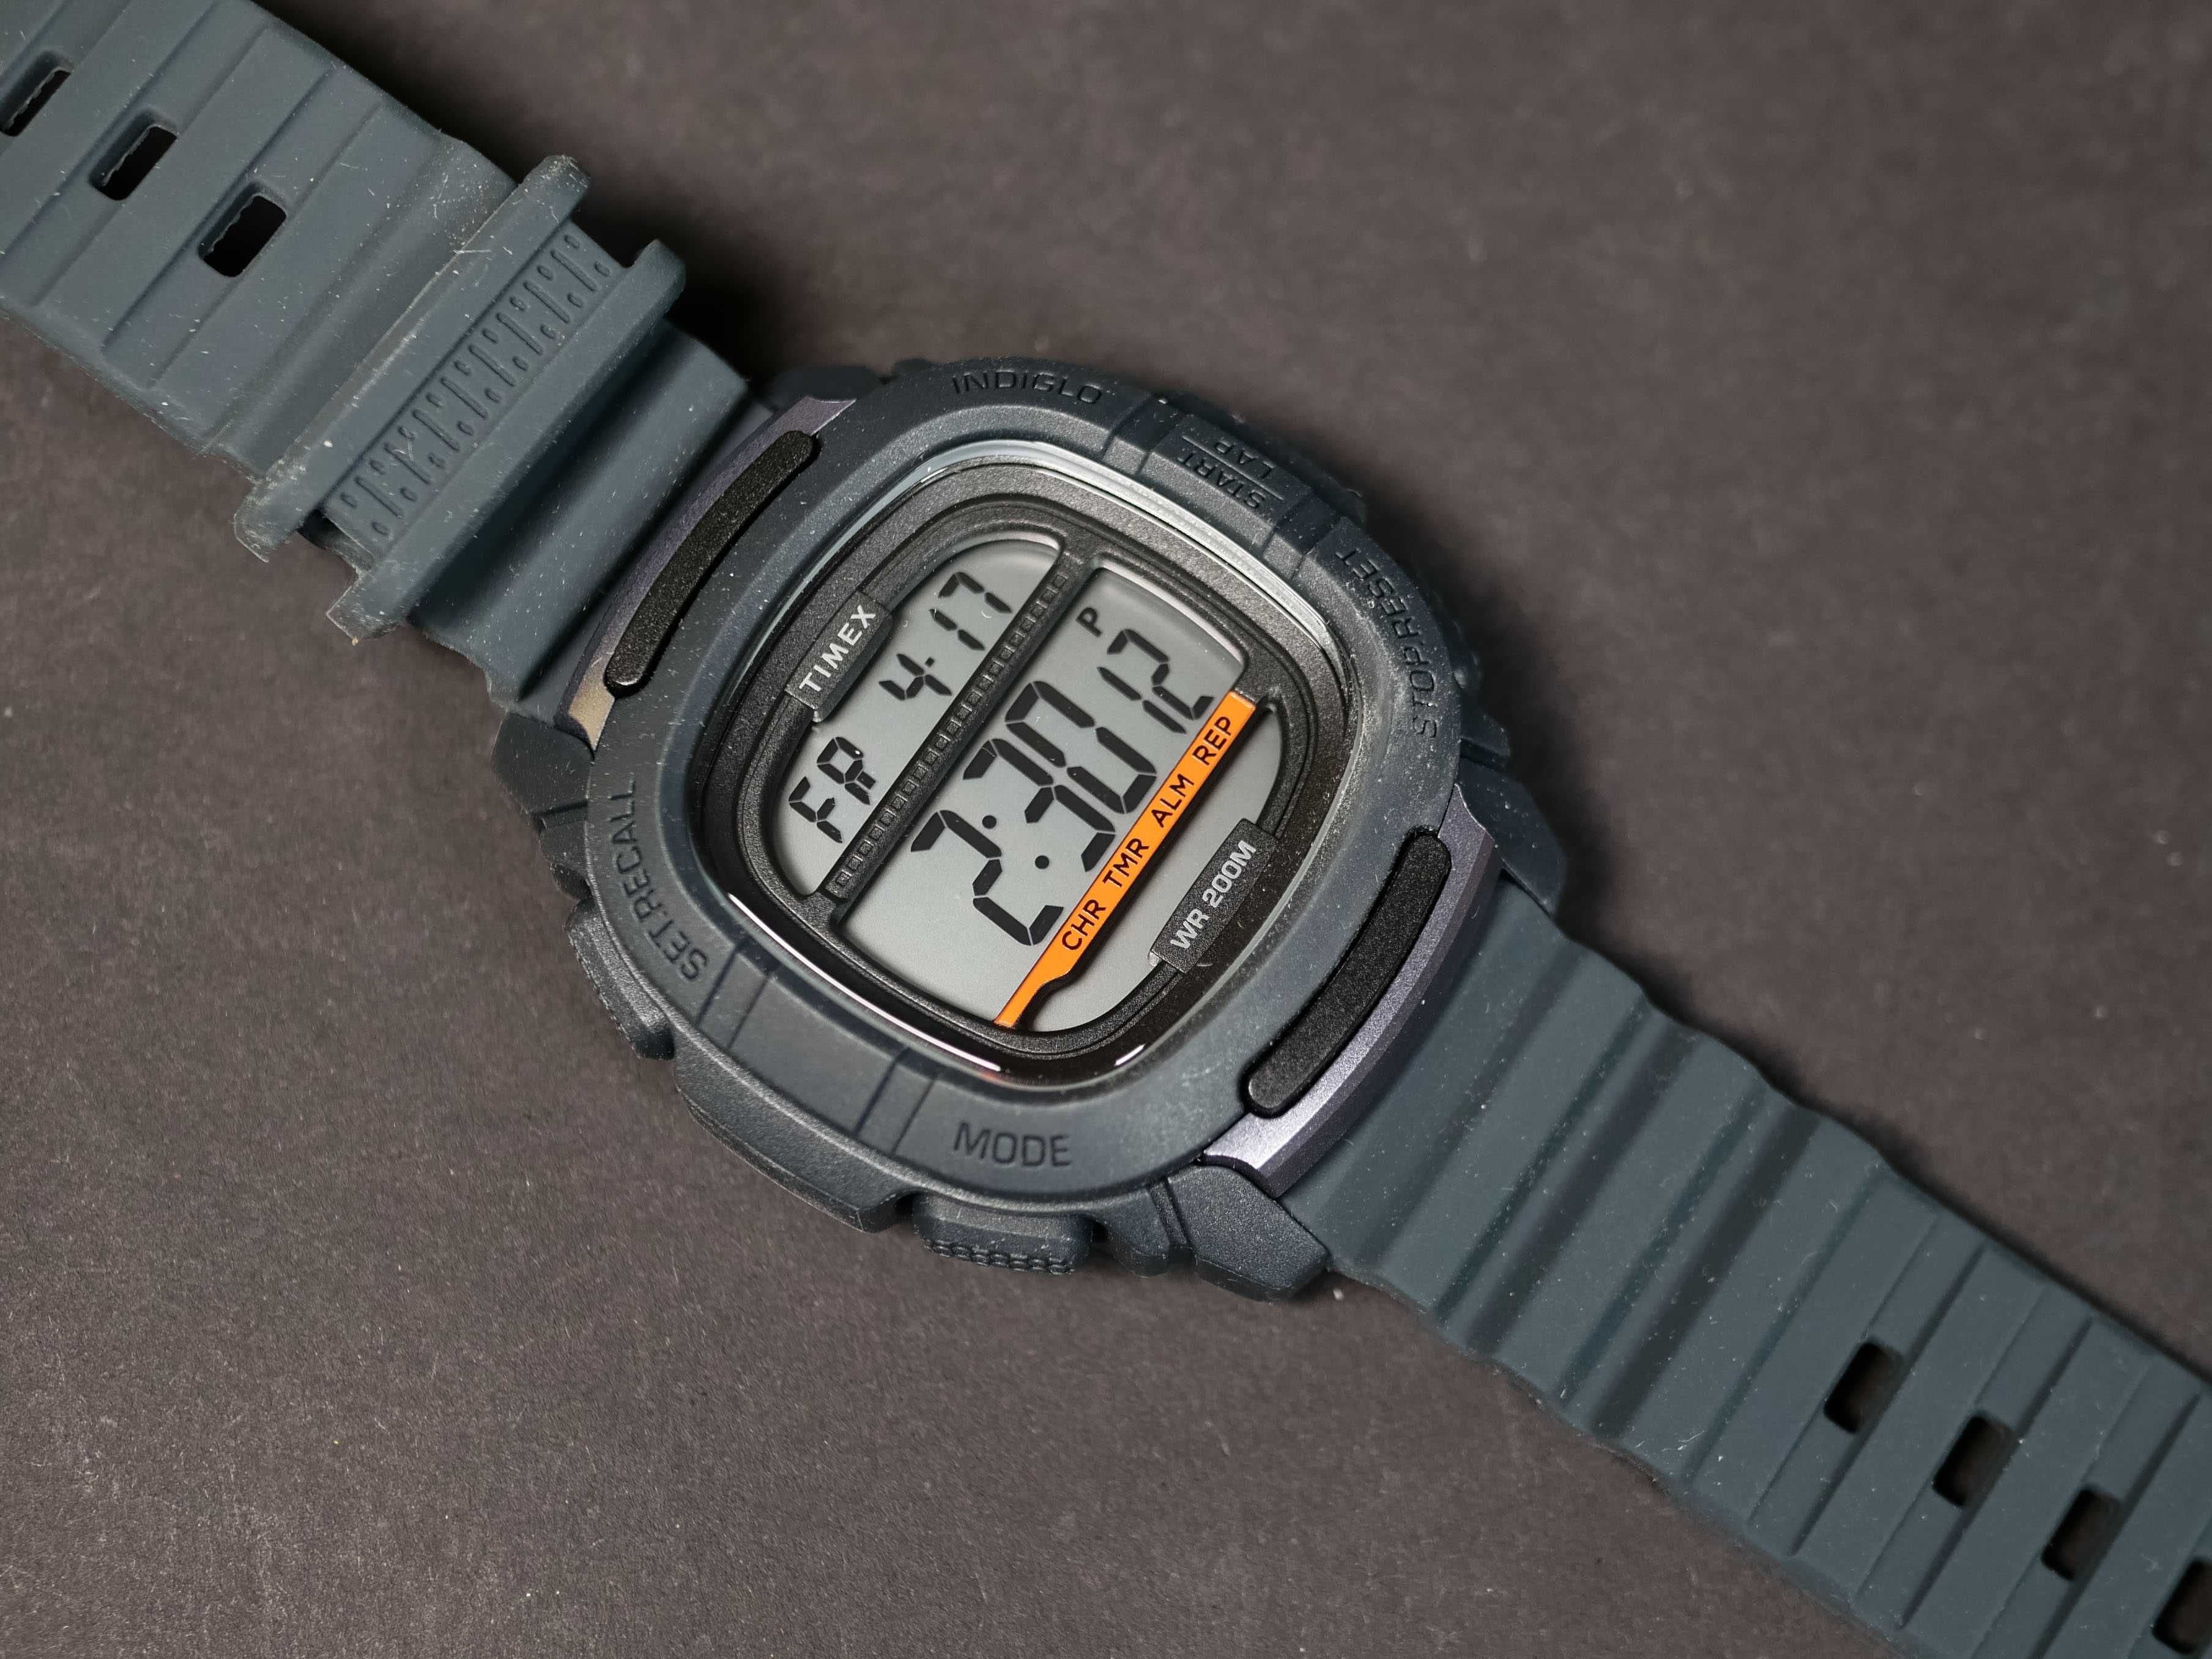 Timex Tw5M26700 Command Shock Resistant